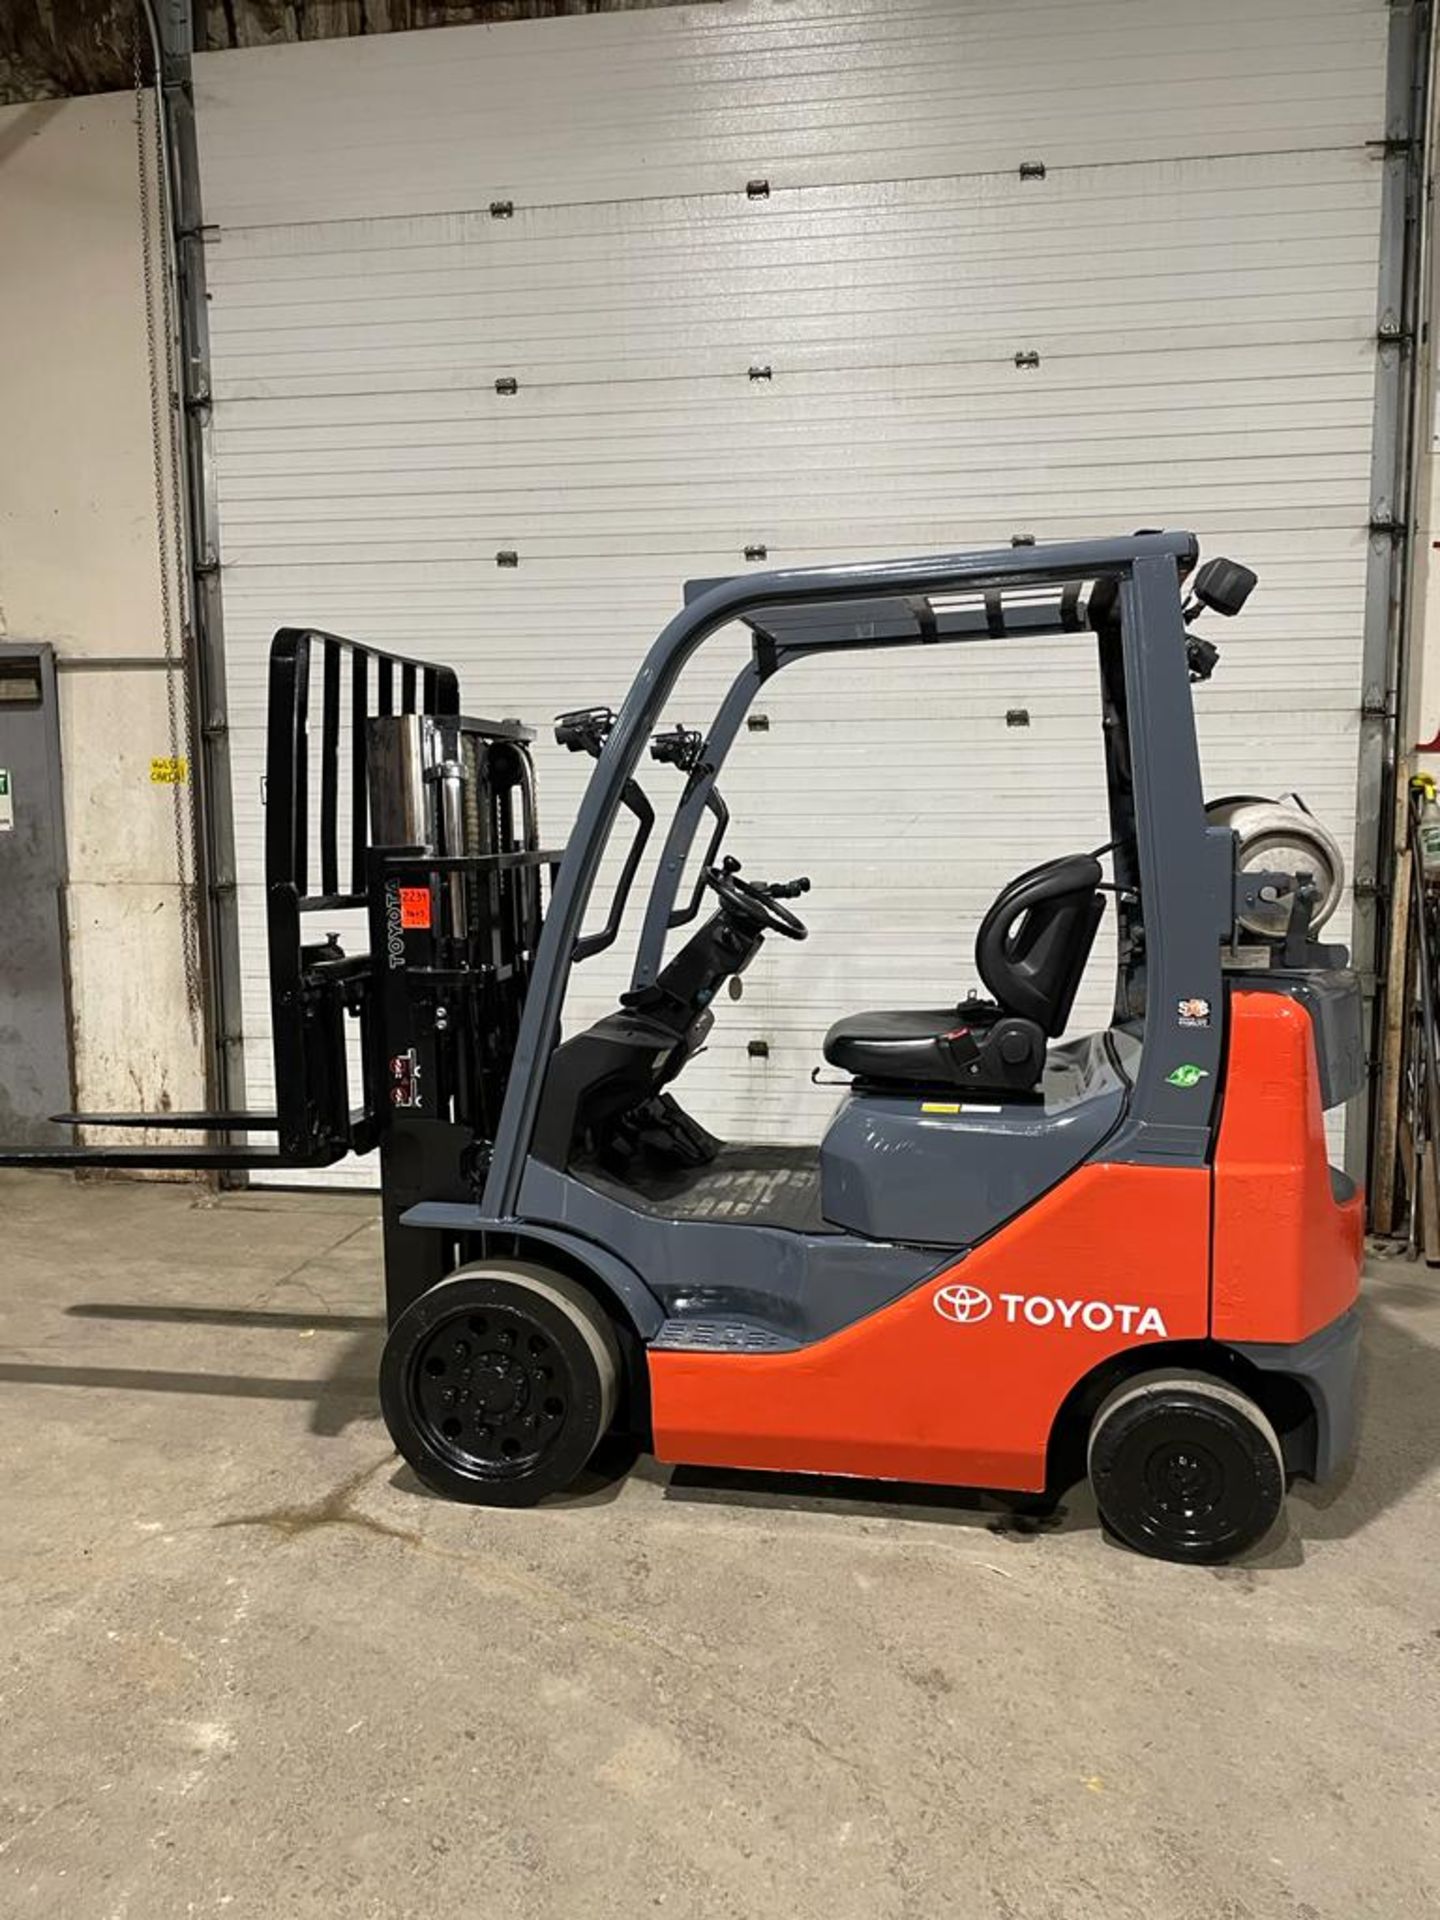 NICE 2019 Toyota 4,000lbs Capacity Forklift LPG (propane) with sideshift (no propane tank included)